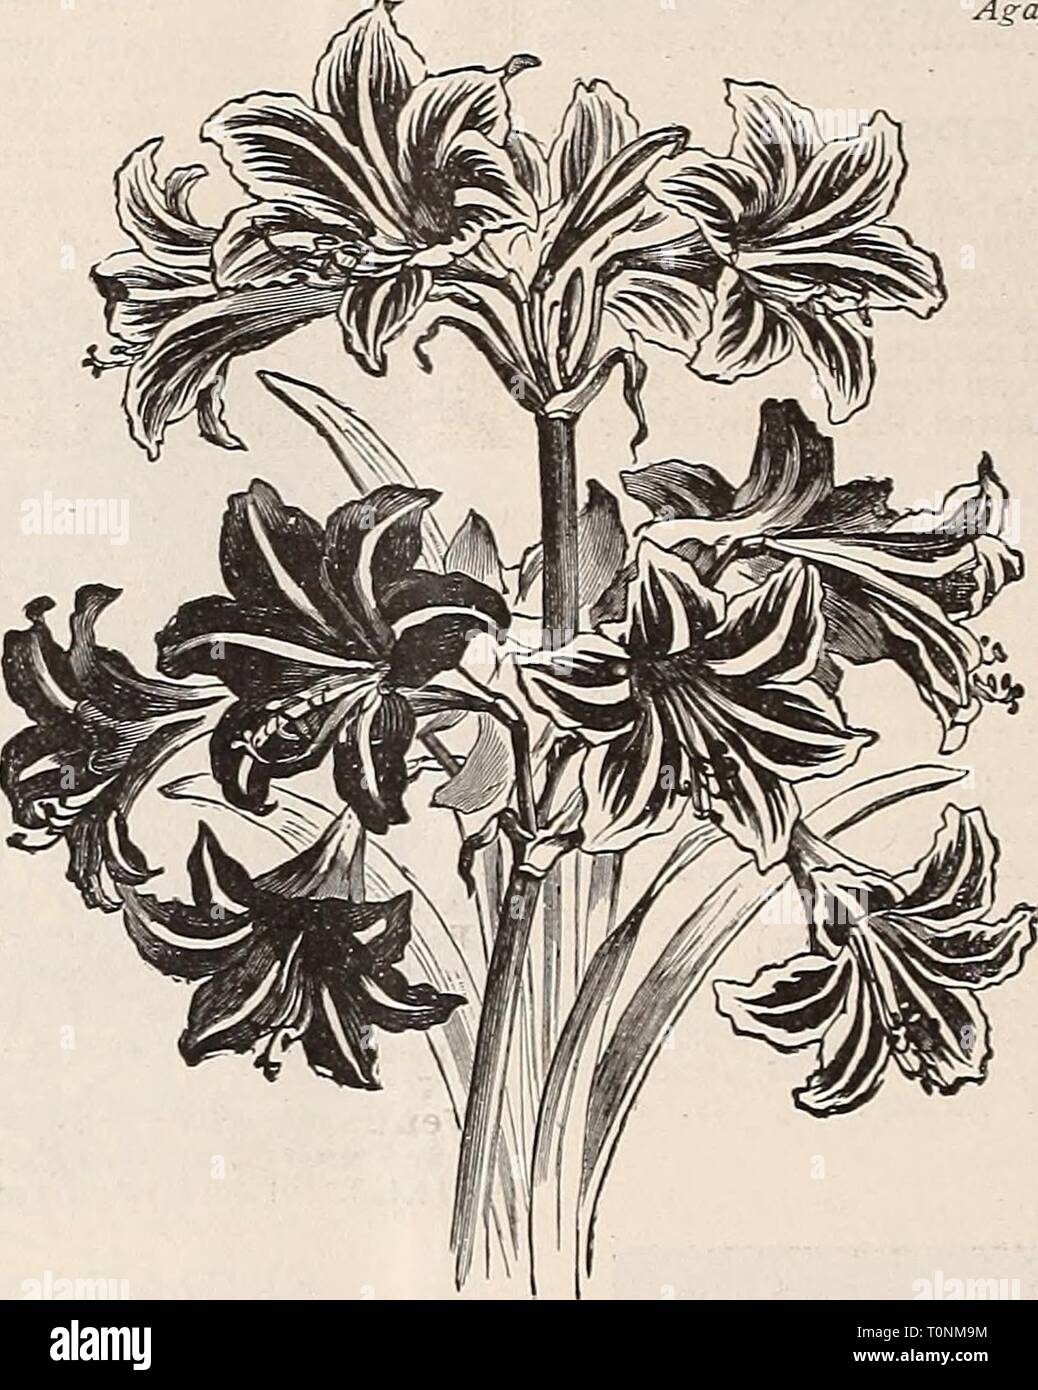 Dreer's autumn catalogue  1895 Dreer's autumn catalogue : 1895  dreersautumncata1895henr Year: 1895  Agapanthus. AGAPANTHUS. (African Lily.) Splendid ornamental plants, bearing large clusters of bright blue and pure white flowers on long flower stalks, and lasting a iong time in bloom. There is no finer plant than this for outdoor decoration, planted in large pots or tubs on the lawn, terrace or piazza. It does well in the house or greenhouse in winter, requir- ing but slight protection. It is a rapid grower and gross feeder, and the chief point in its cultiva- tion is to divide the plants bef Stock Photo